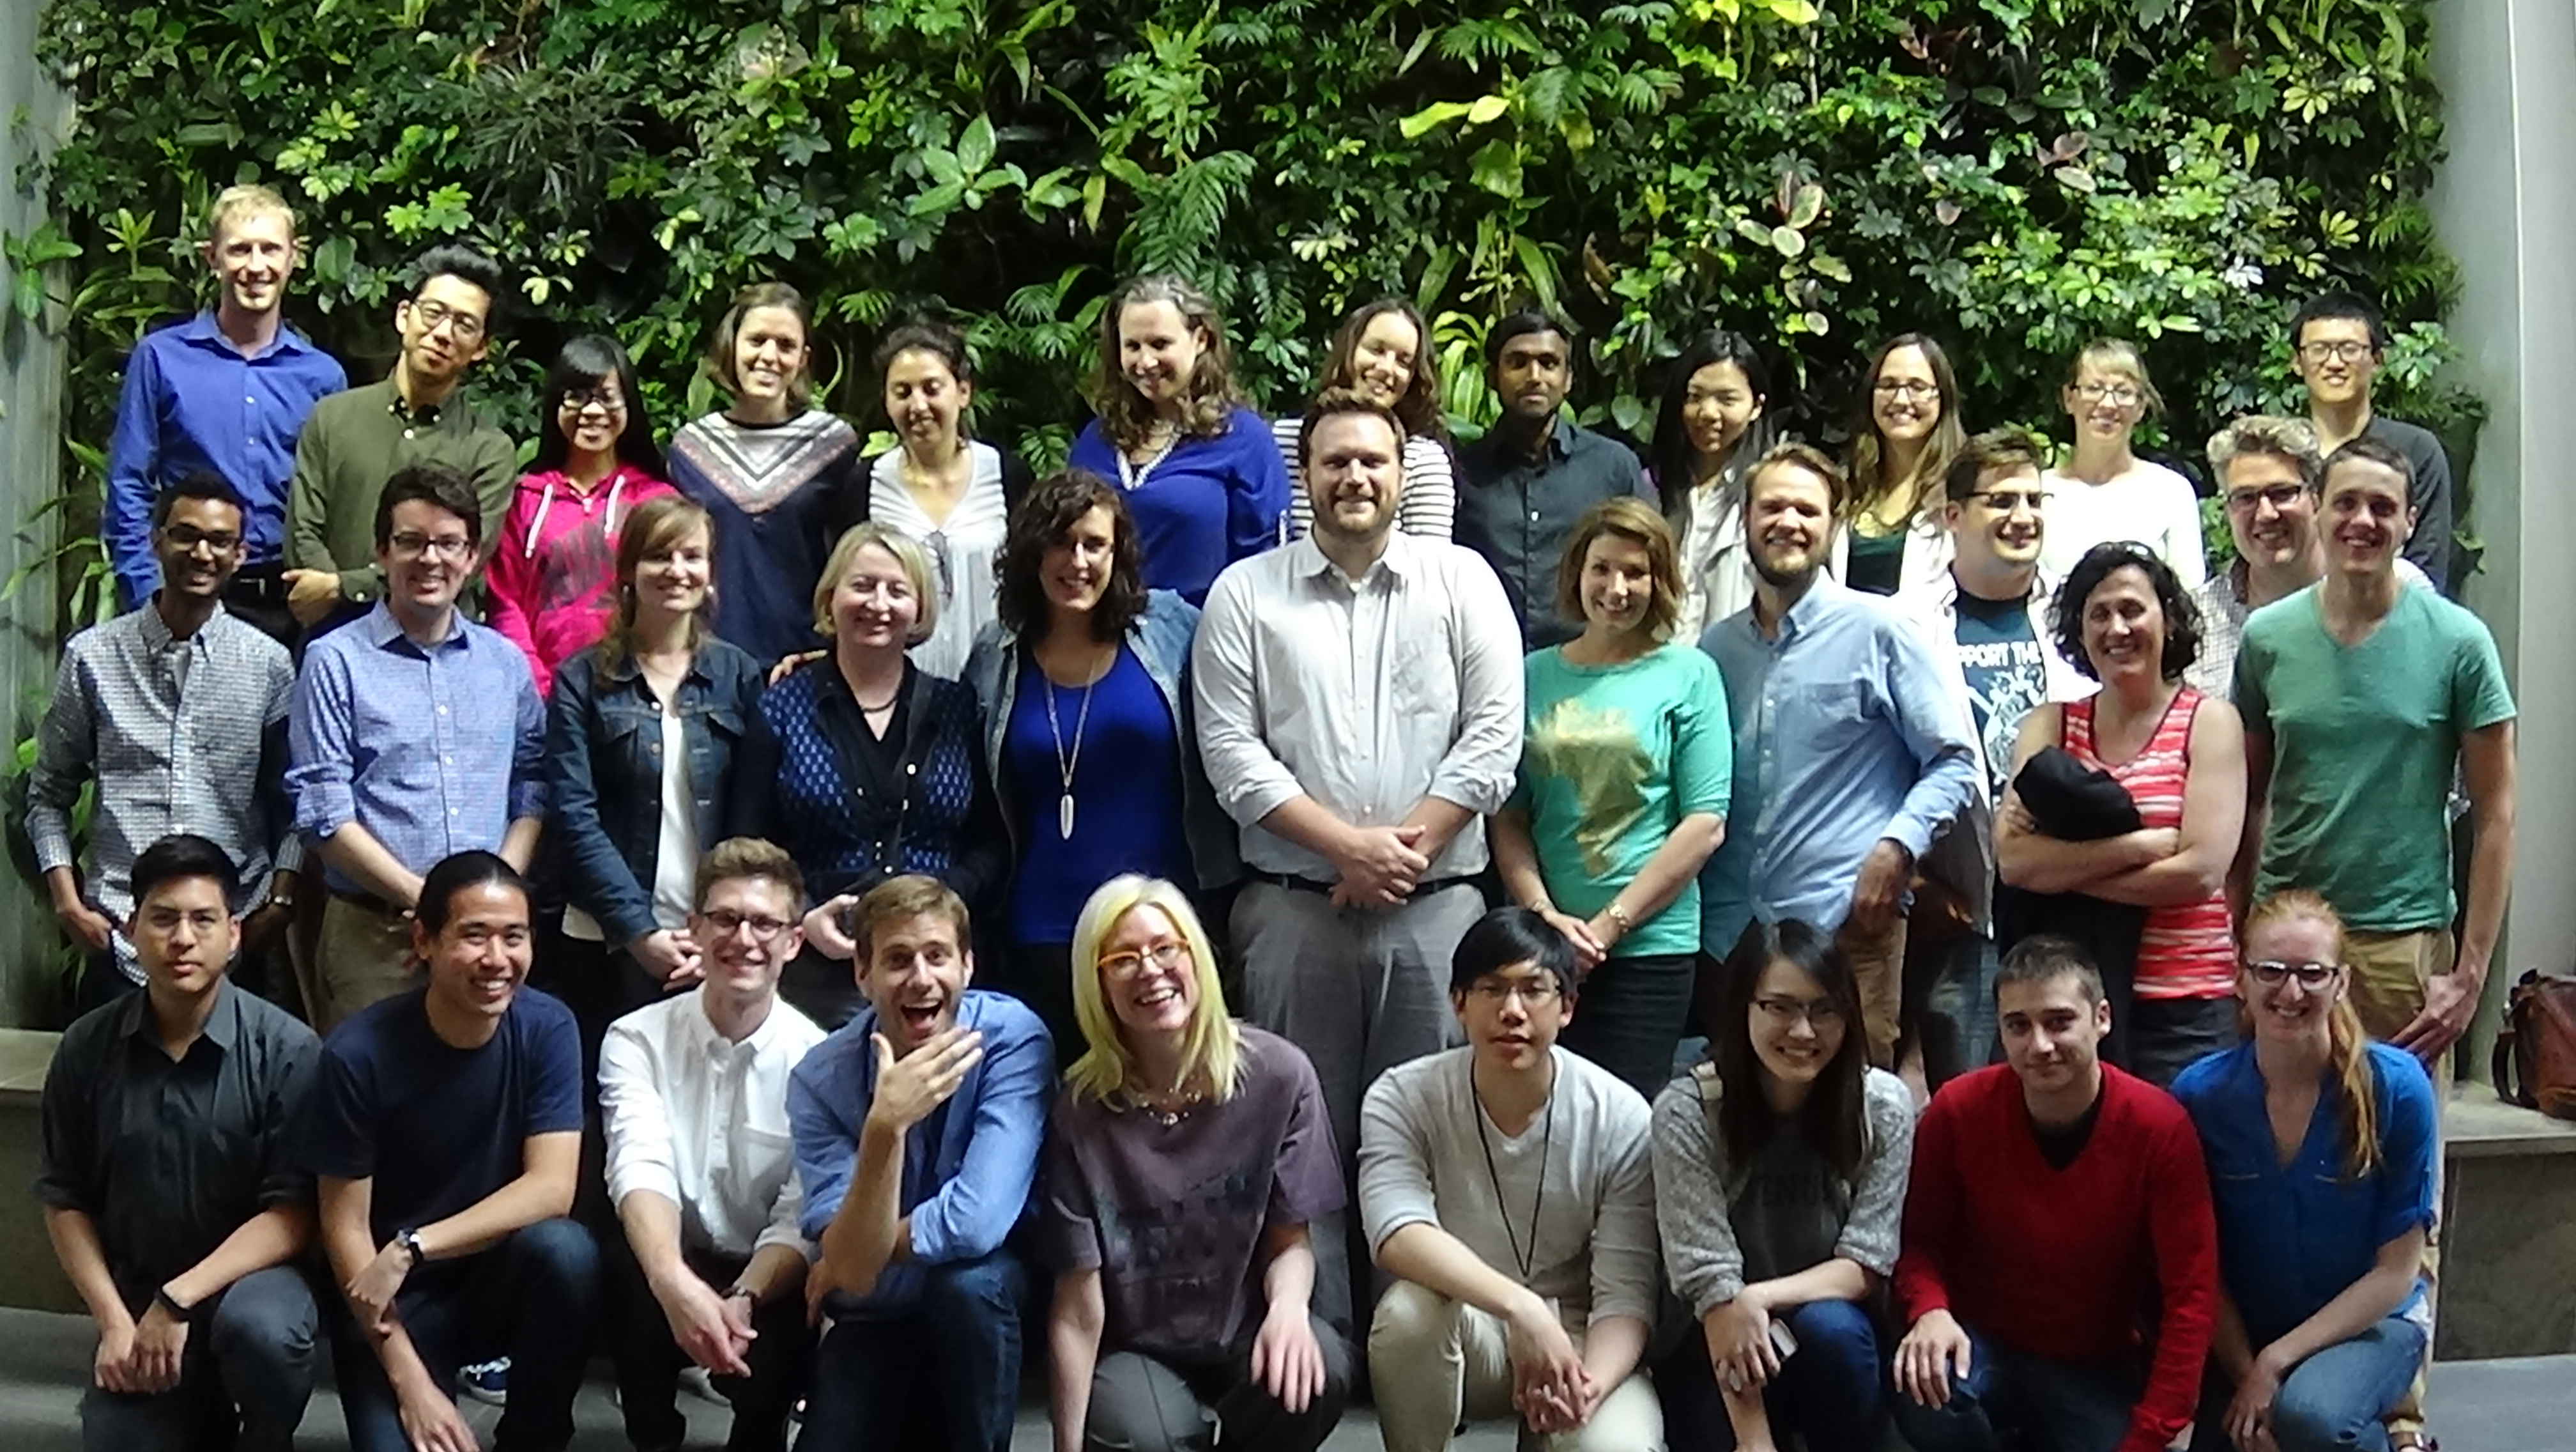 2015 Geothink Summer Institute students, faculty and staff after the conference concludes.